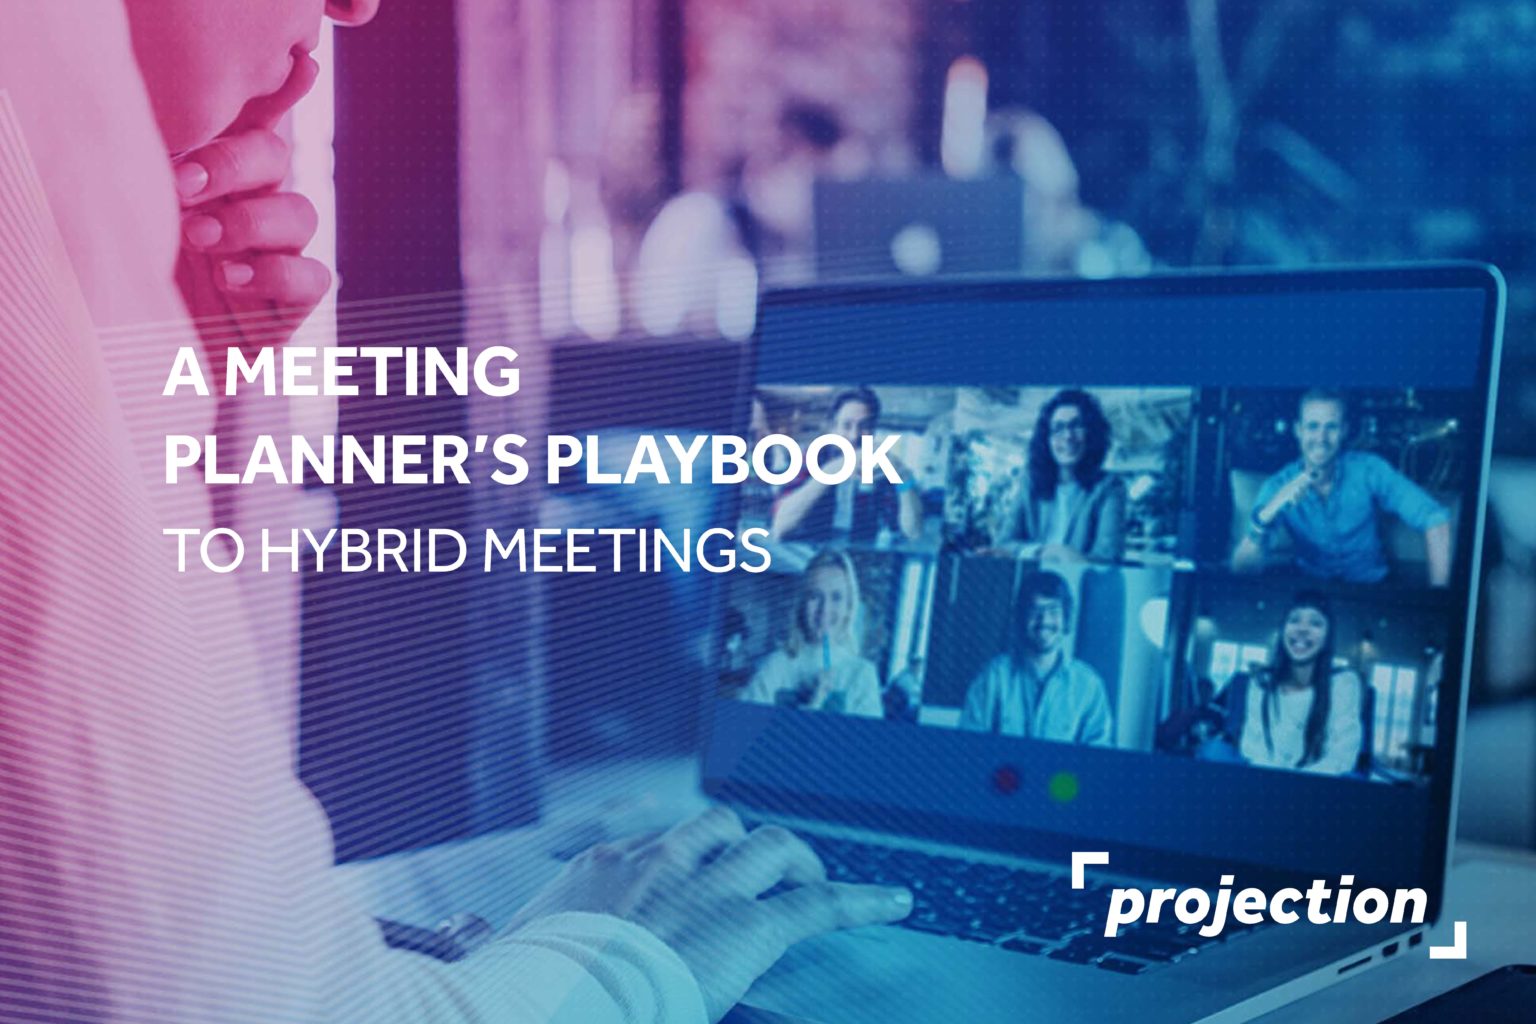 [Guide] A Meeting Planner's Playbook to Hybrid Meetings Projection